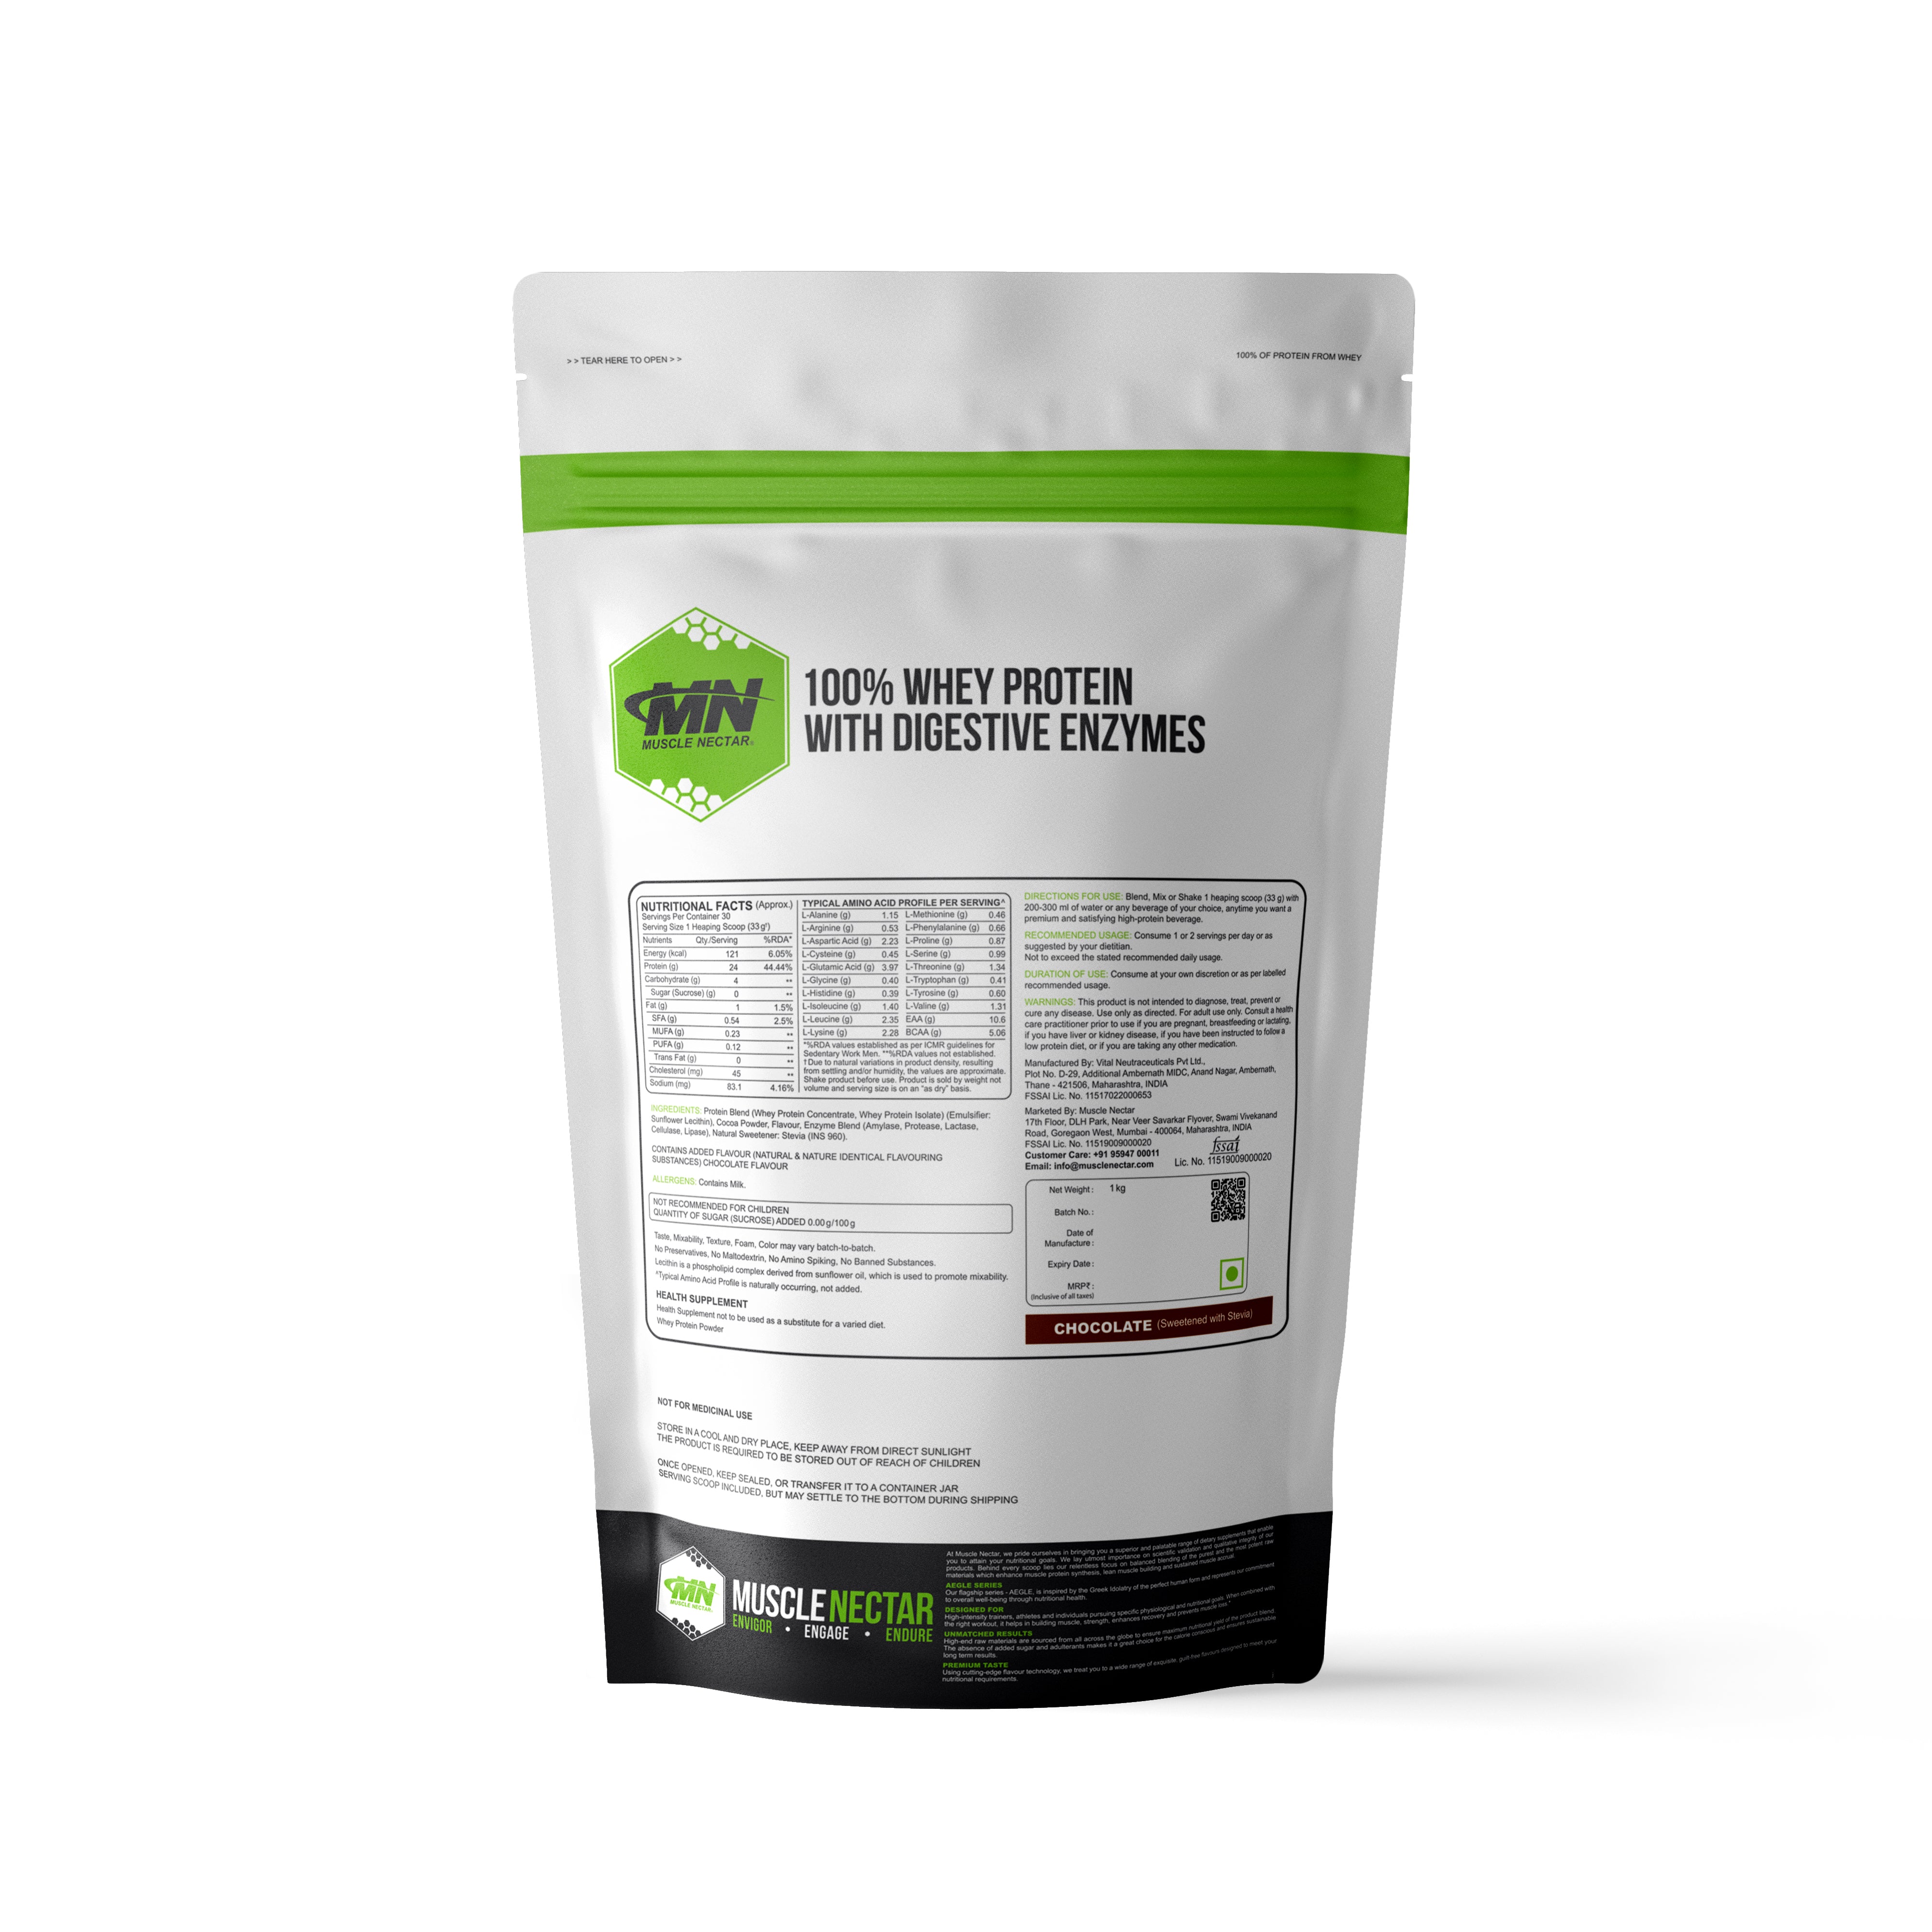 100% Whey Protein Blend with Digestive Enzymes